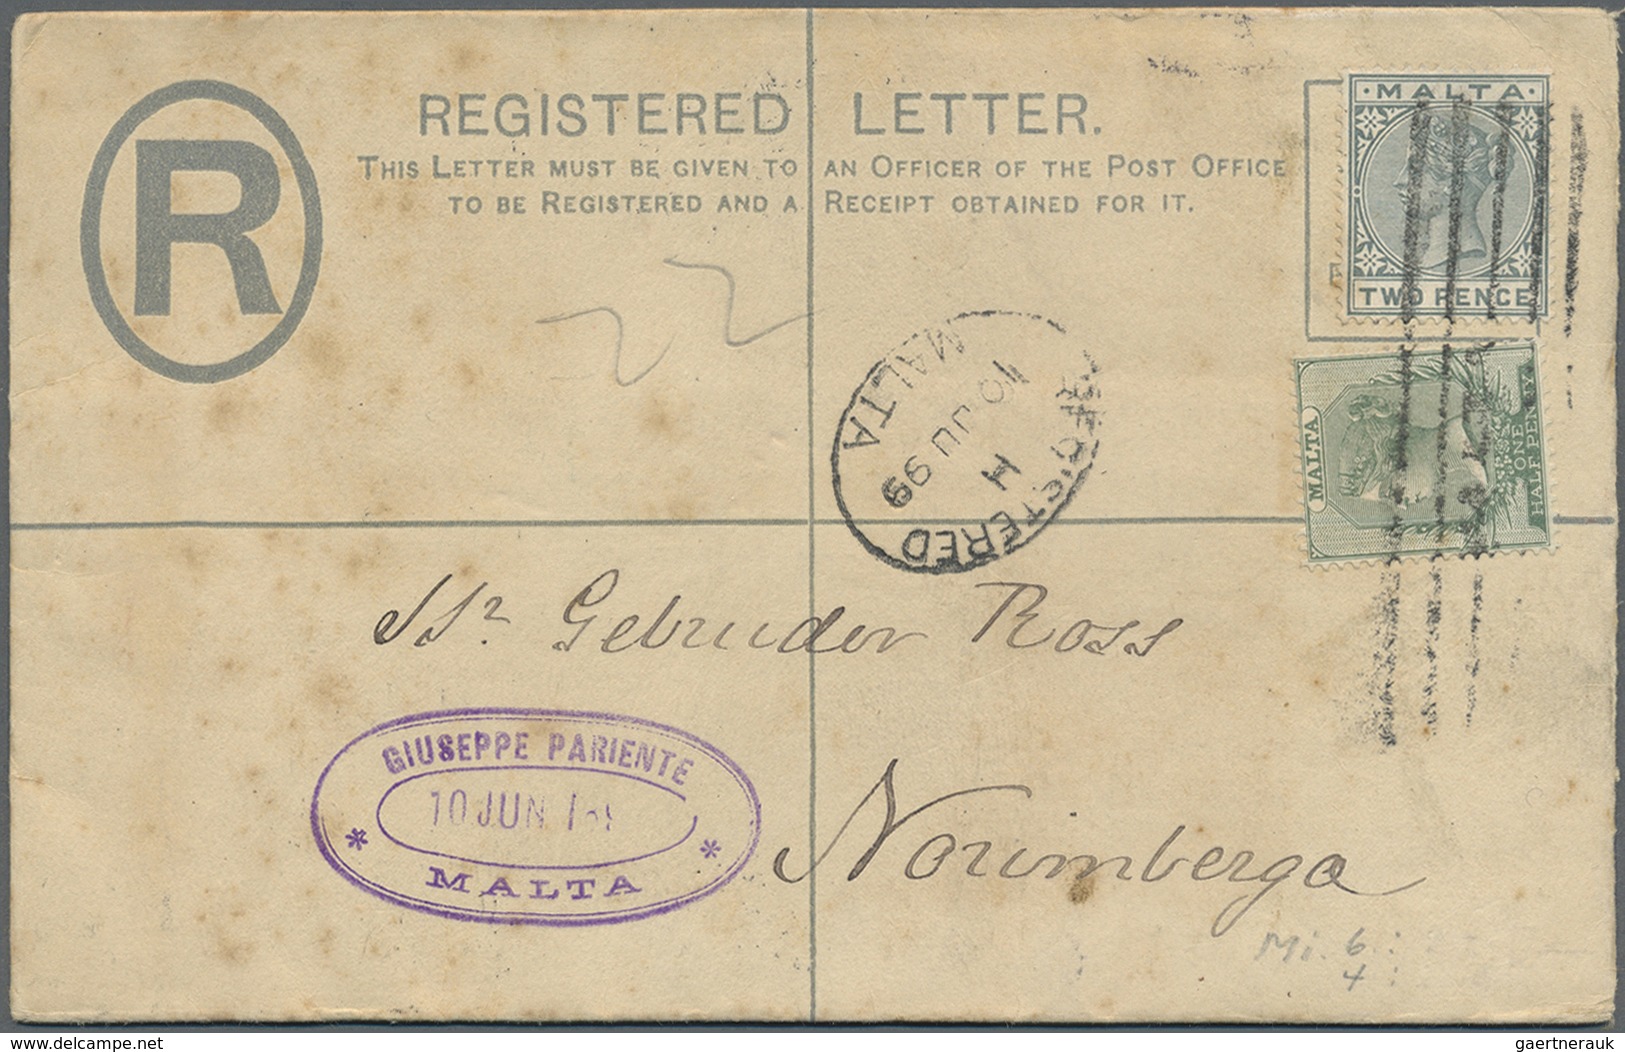 Br/GA Malta: 1845-1950 (ca.), collection of 170 mostly better items, shipmail, postage due, many registere